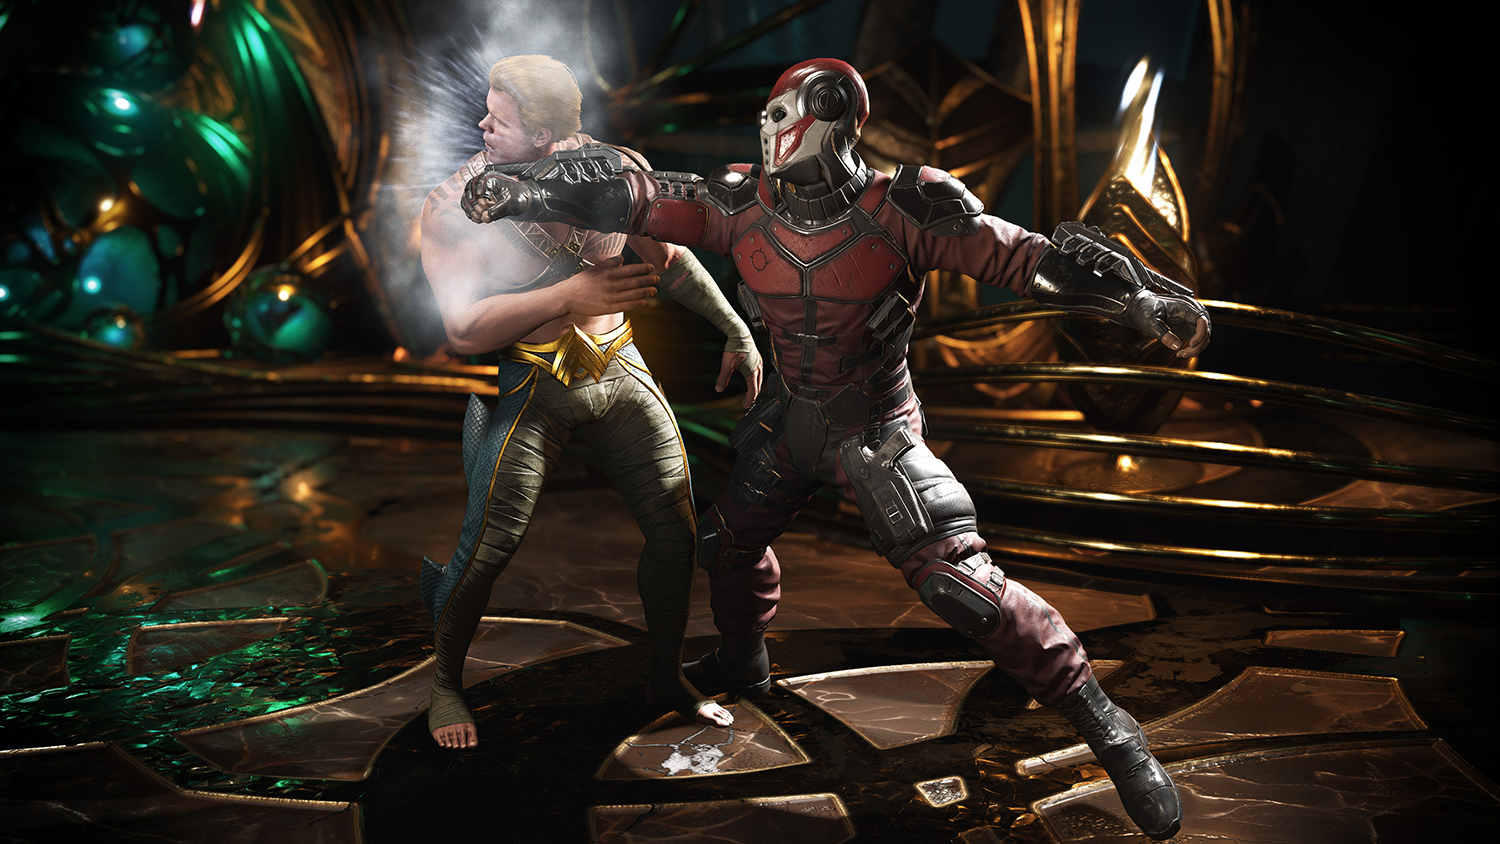 Injustice 2 Reviews, Pros and Cons